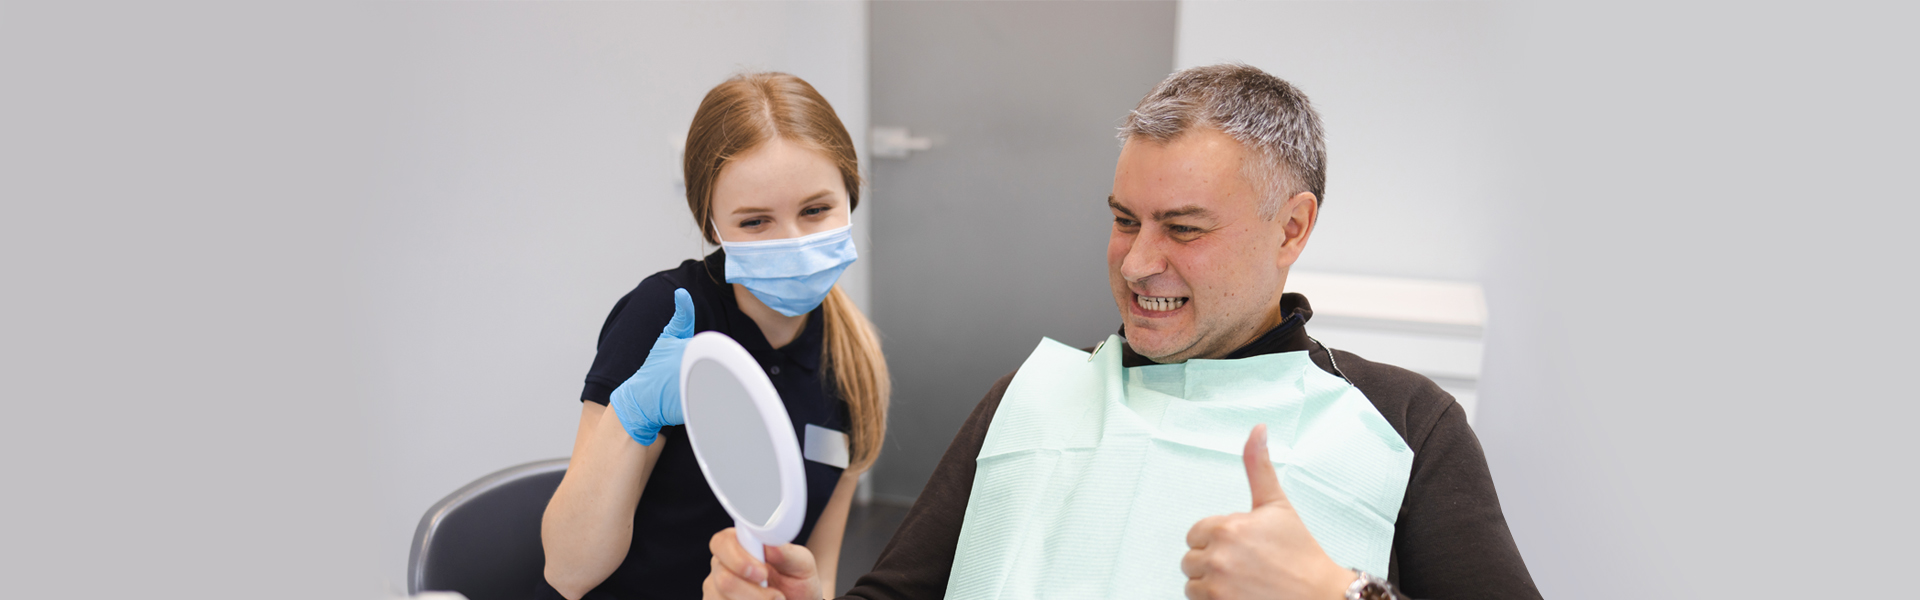 How to Find the Best Dentist Near You in Palm Beach, FL